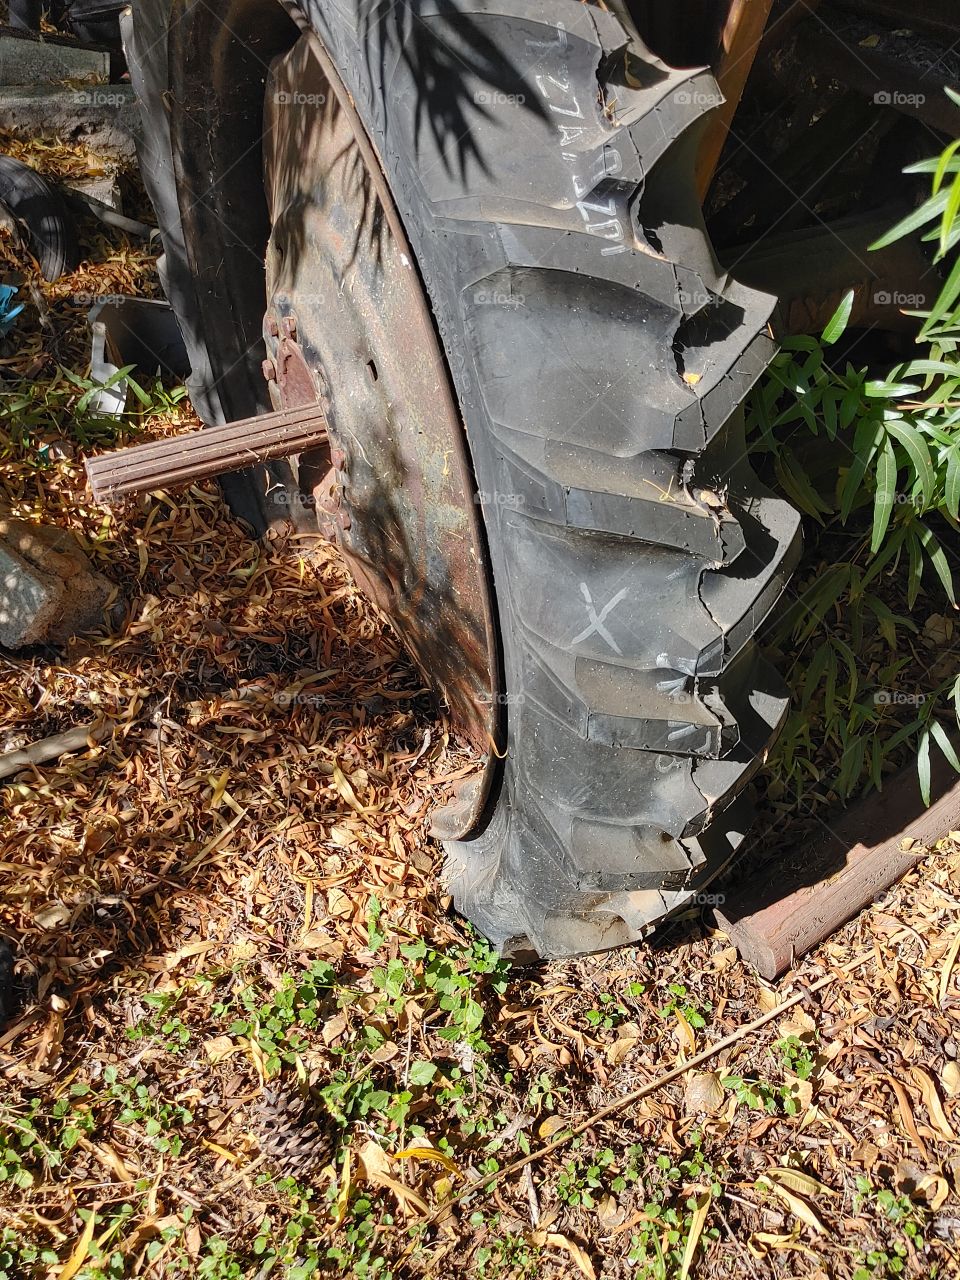 Tractor tire at my house